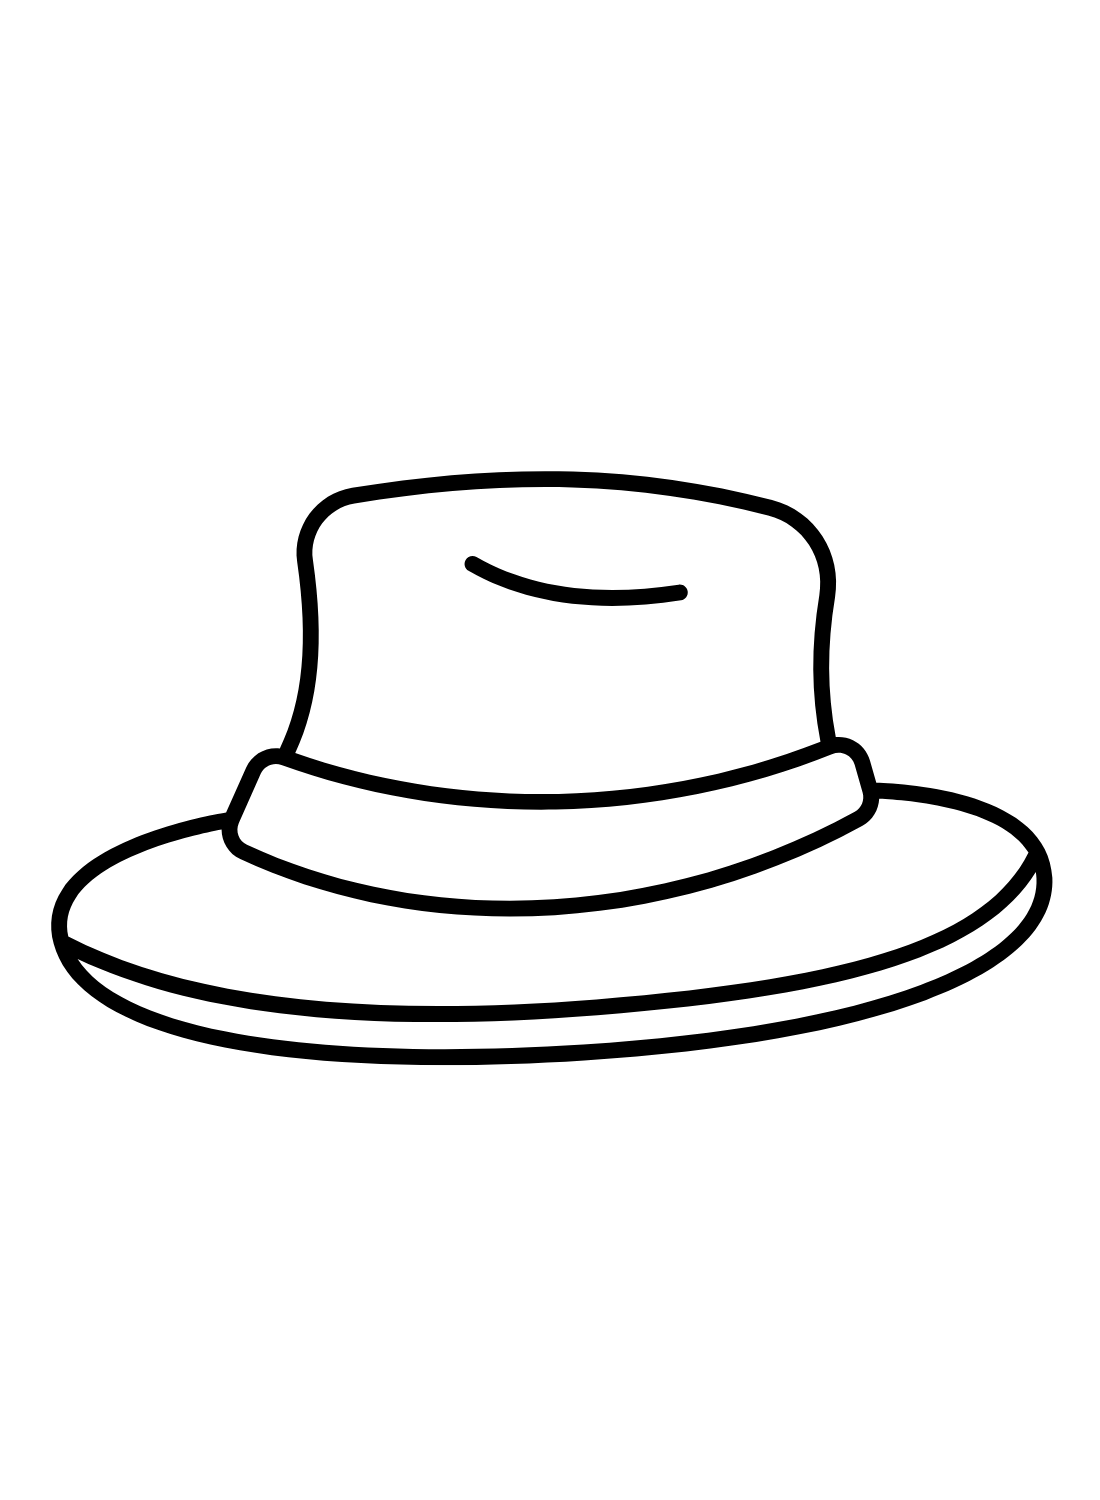 Straw Hat Coloring Page